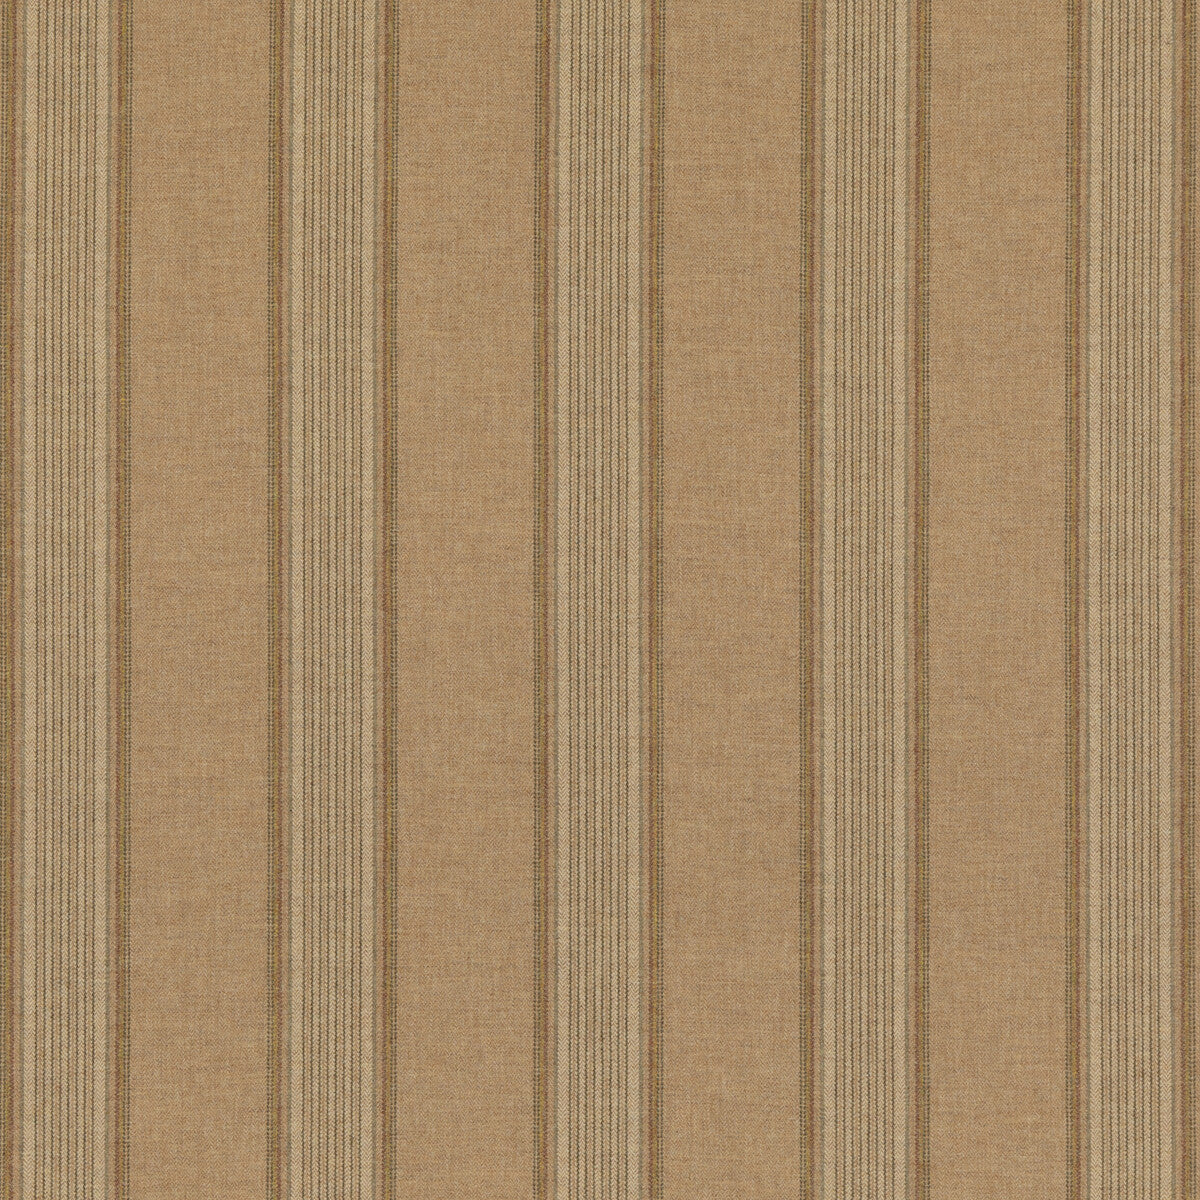 Moray Stripe fabric in stone color - pattern FD808.K102.0 - by Mulberry in the Mulberry Wools IV collection